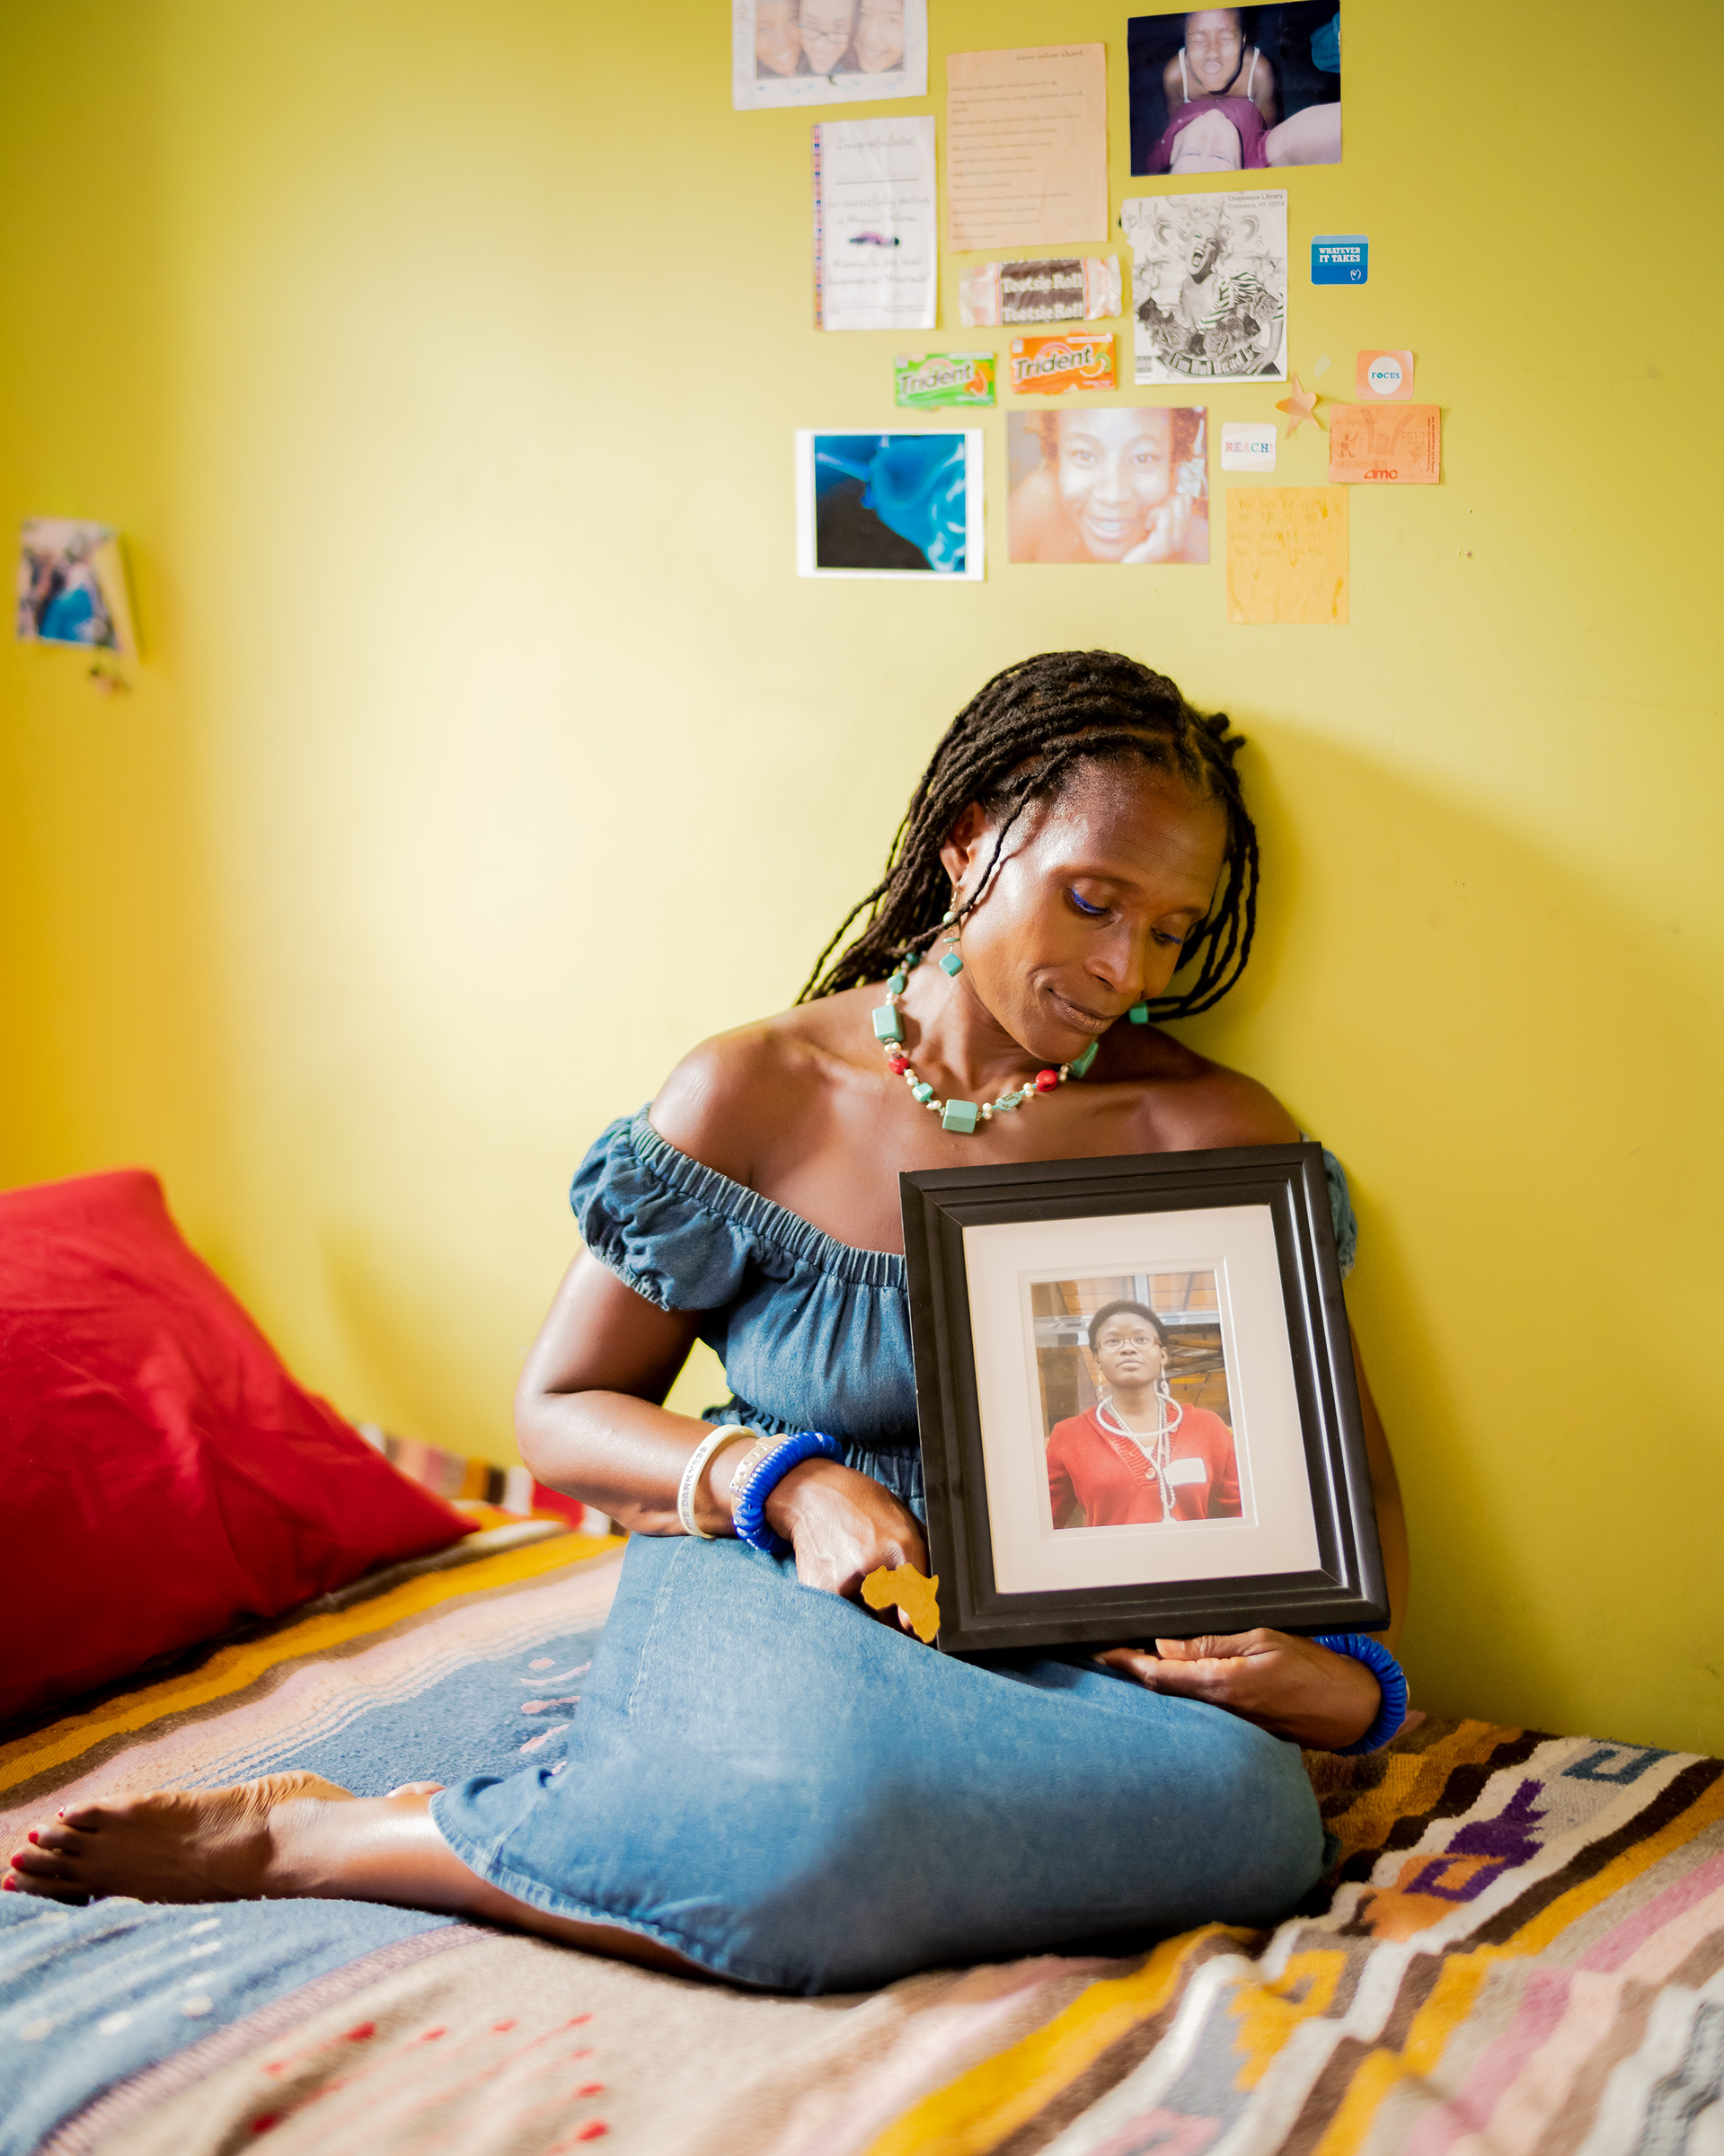 Dionne Monsanto holds a portrait of her daughter, Siwe, in the girl's bedroom in New York City, on Sept. 9, 2020. Siwe, 15, died by suicide in 2011. (Elias Williams for TIME)